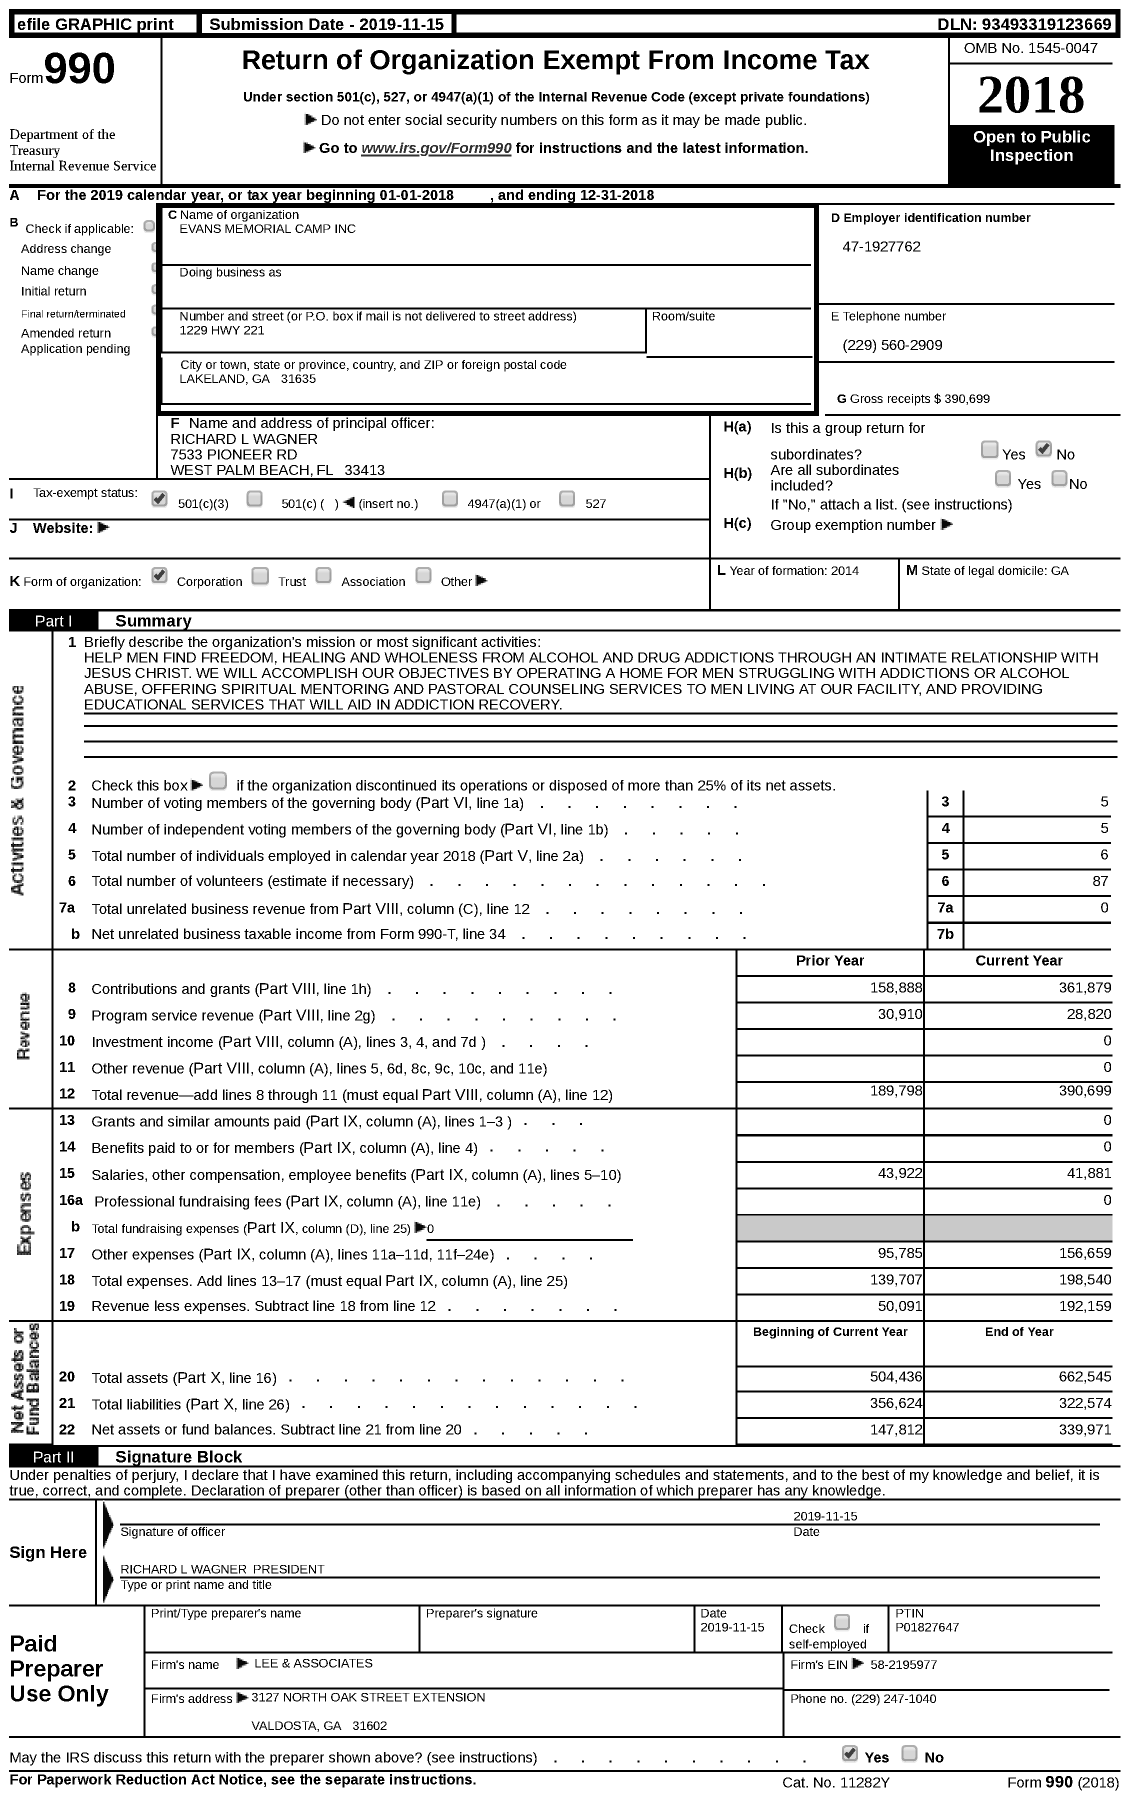 Image of first page of 2018 Form 990 for Evans Memorial Camp